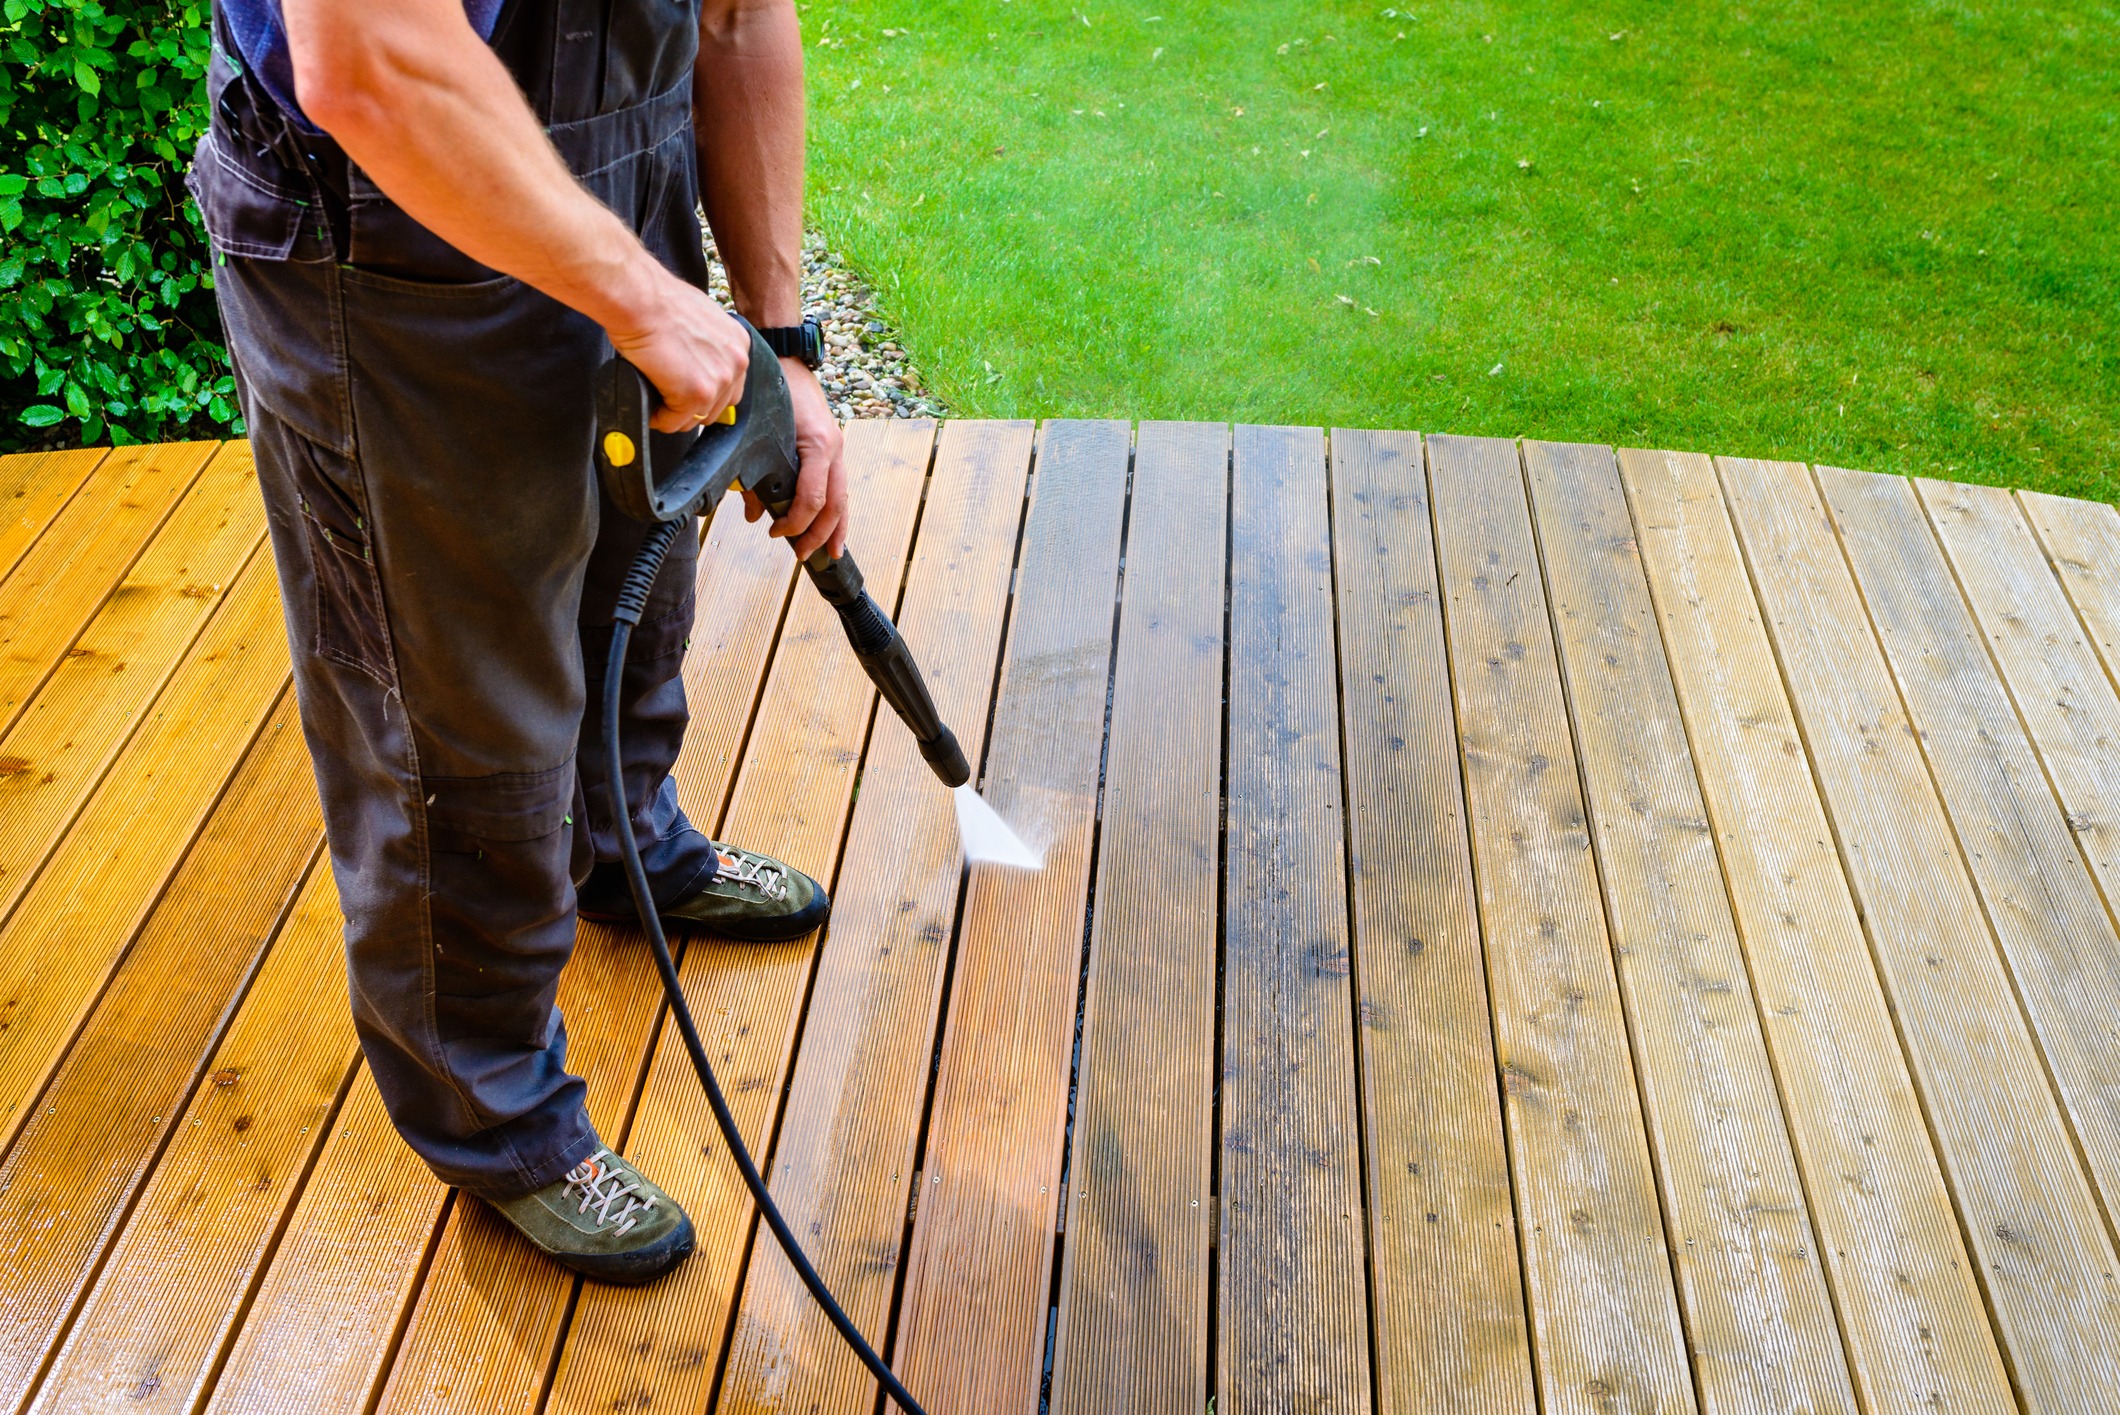 Here are some steps and instructions for how to pressure wash and stain your deck.